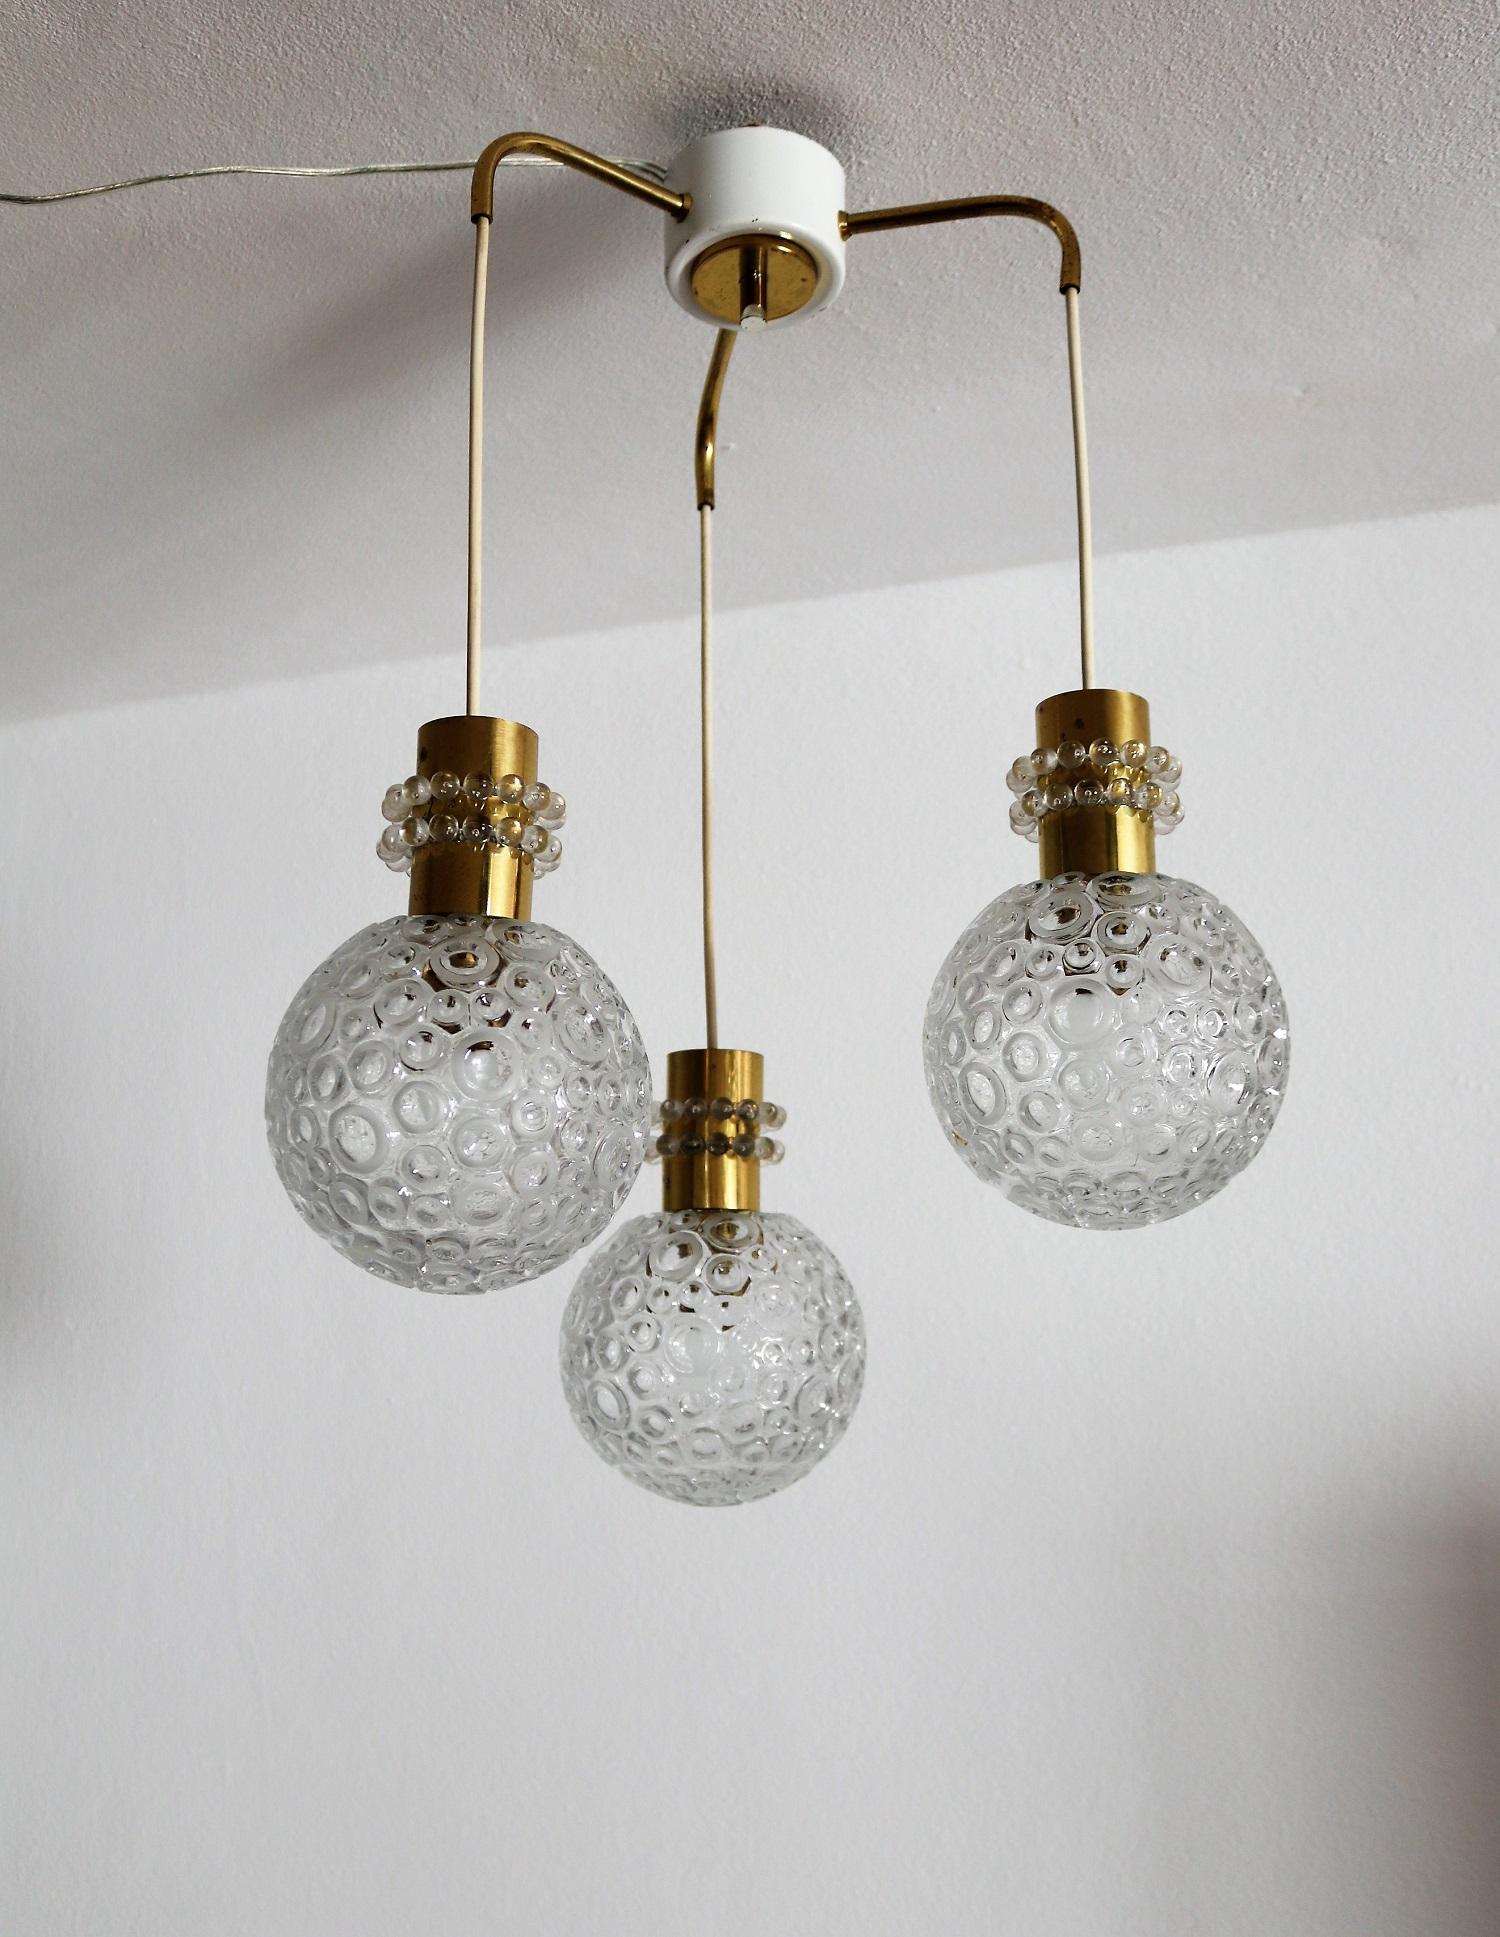 Midcentury Cascade Ceiling Lamp with 3 Glass Pendents in Emil Stejnar Style For Sale 1